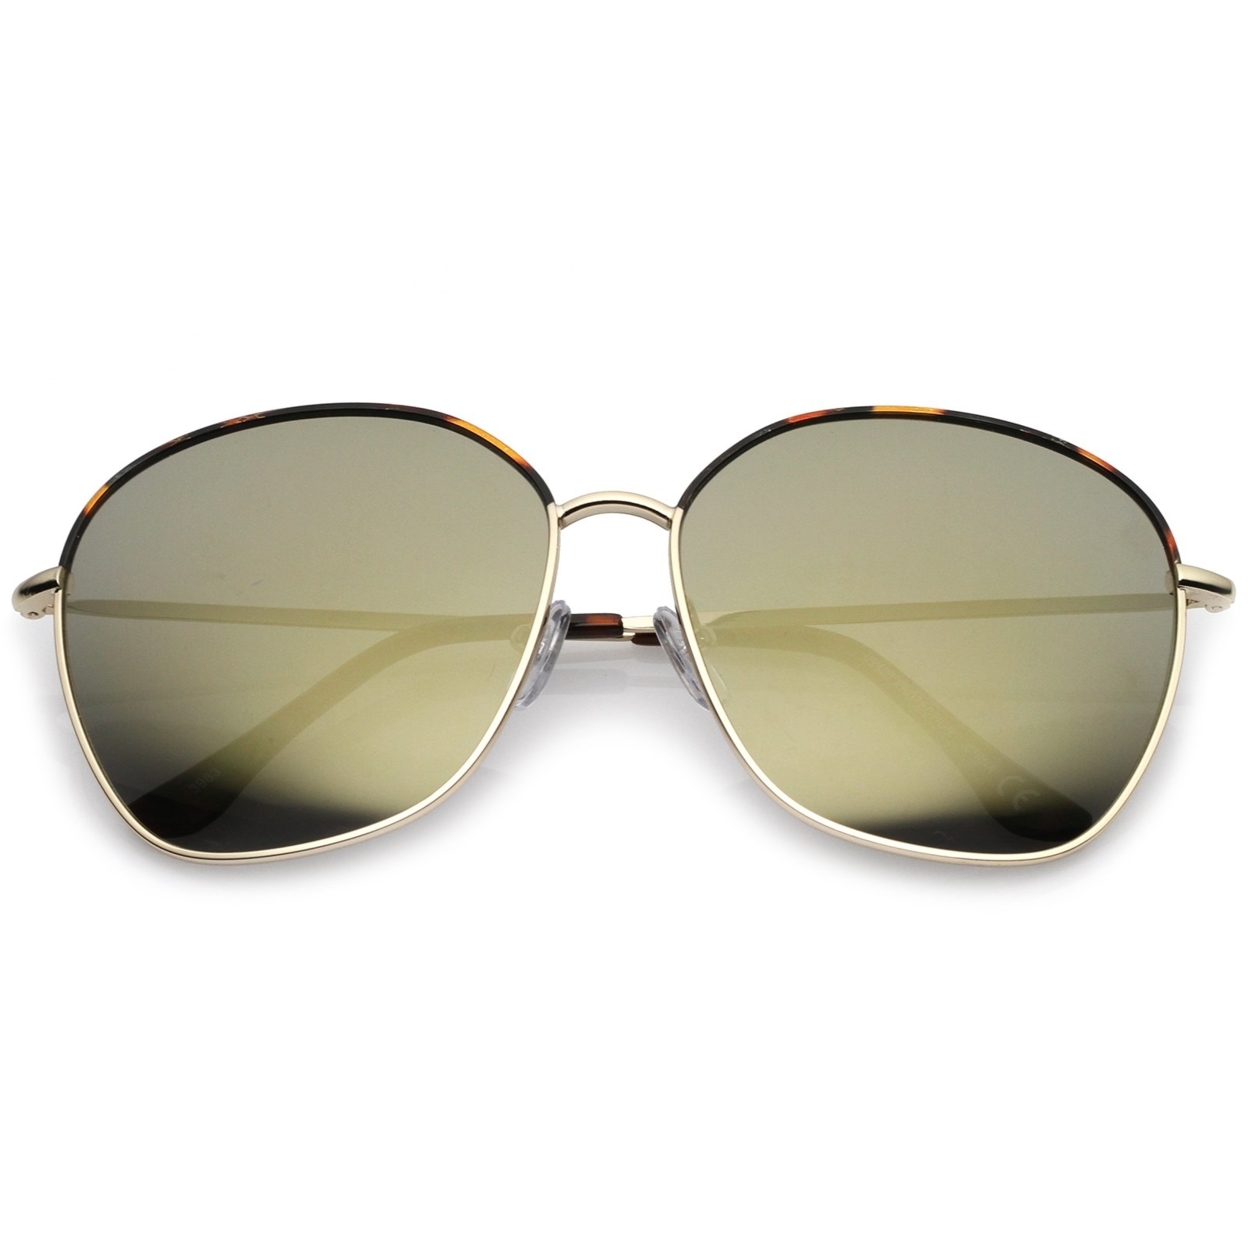 Mod Oversize Two-Toned Metal Frame Slim Temples Square Sunglasses 61mm - Tortoise-Gold / Gold Mirror